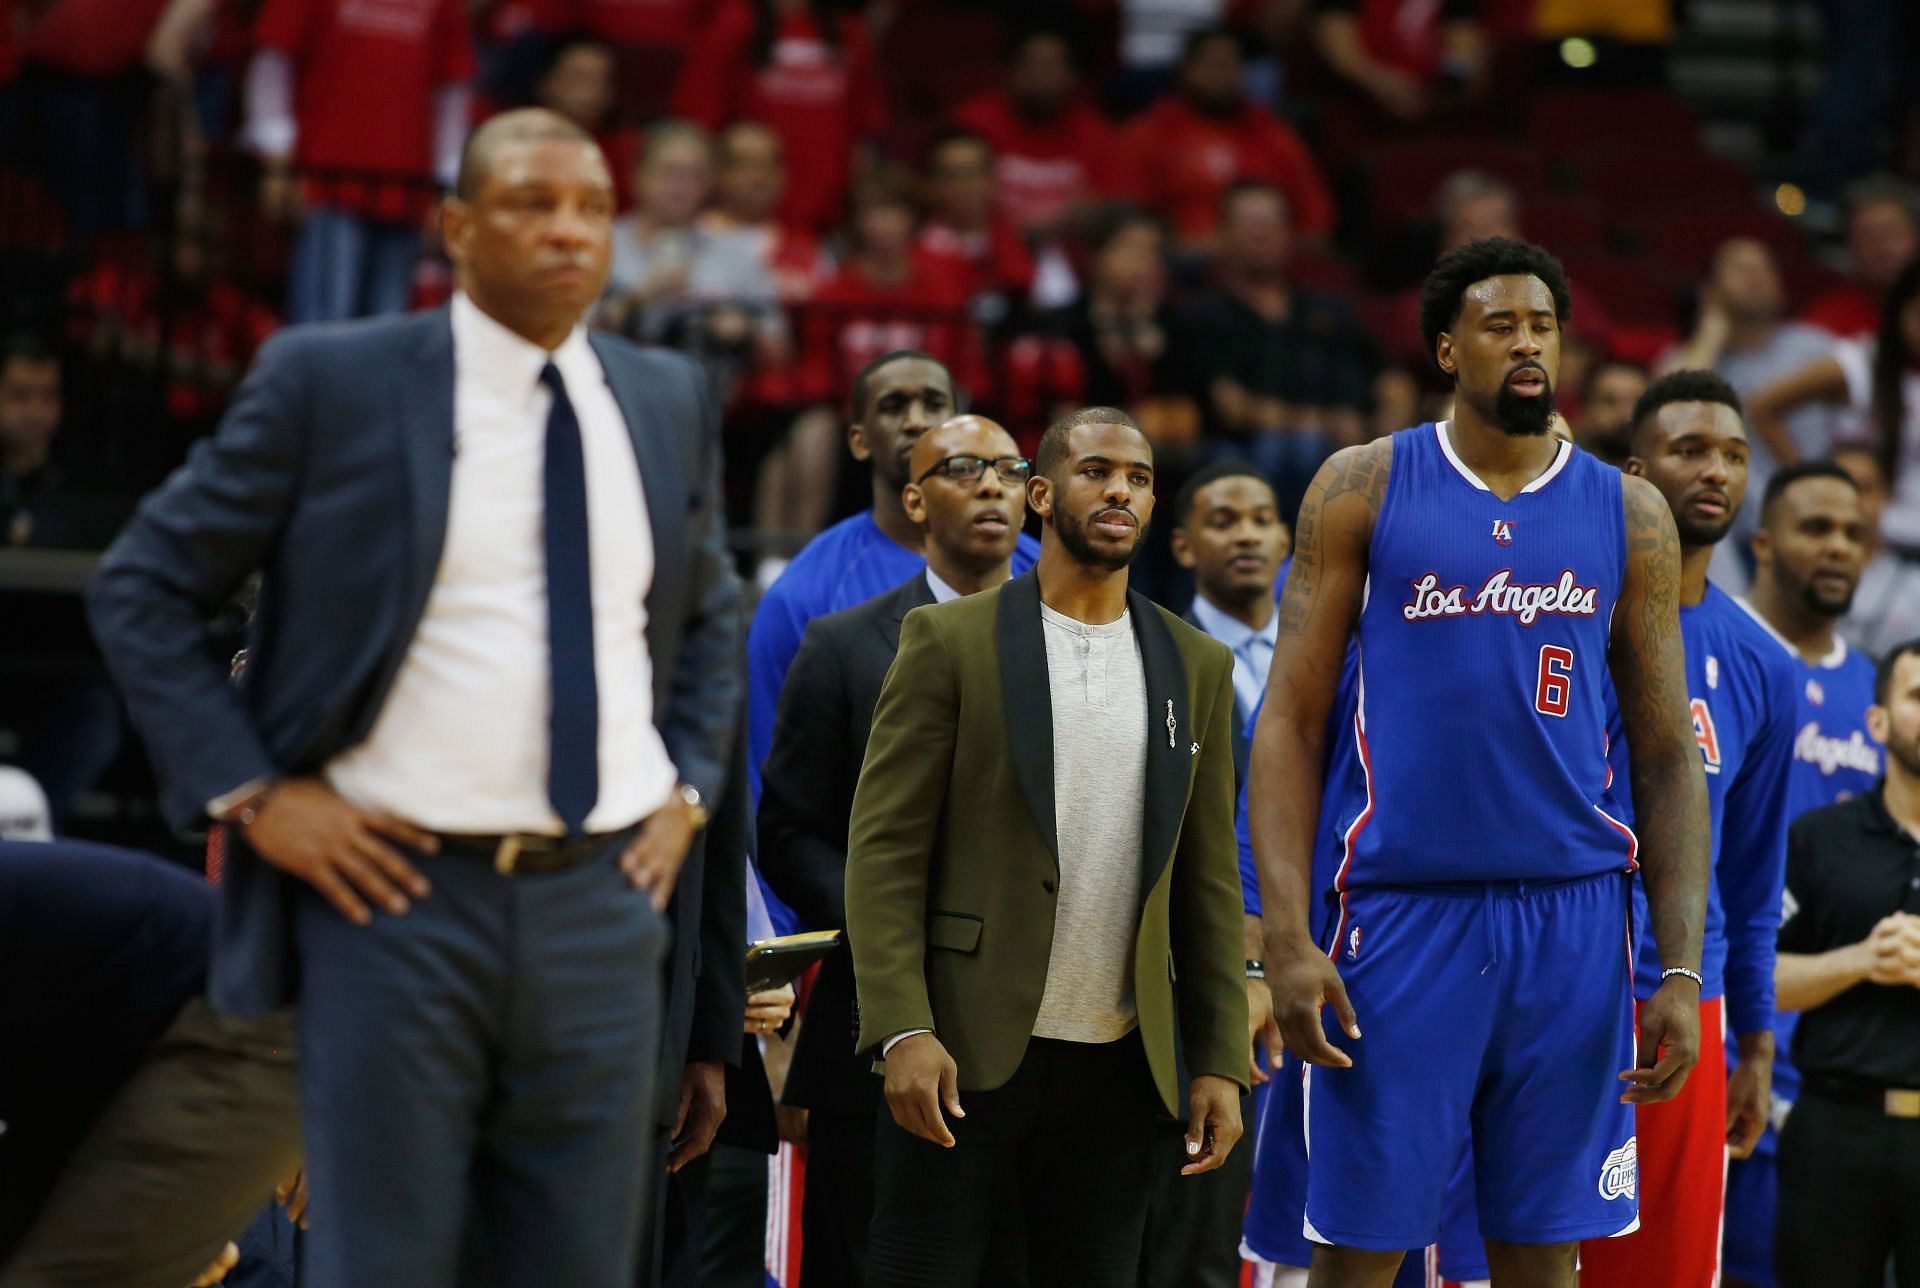 Los Angeles Clippers vs. Houston Rockets &mdash; Game 1